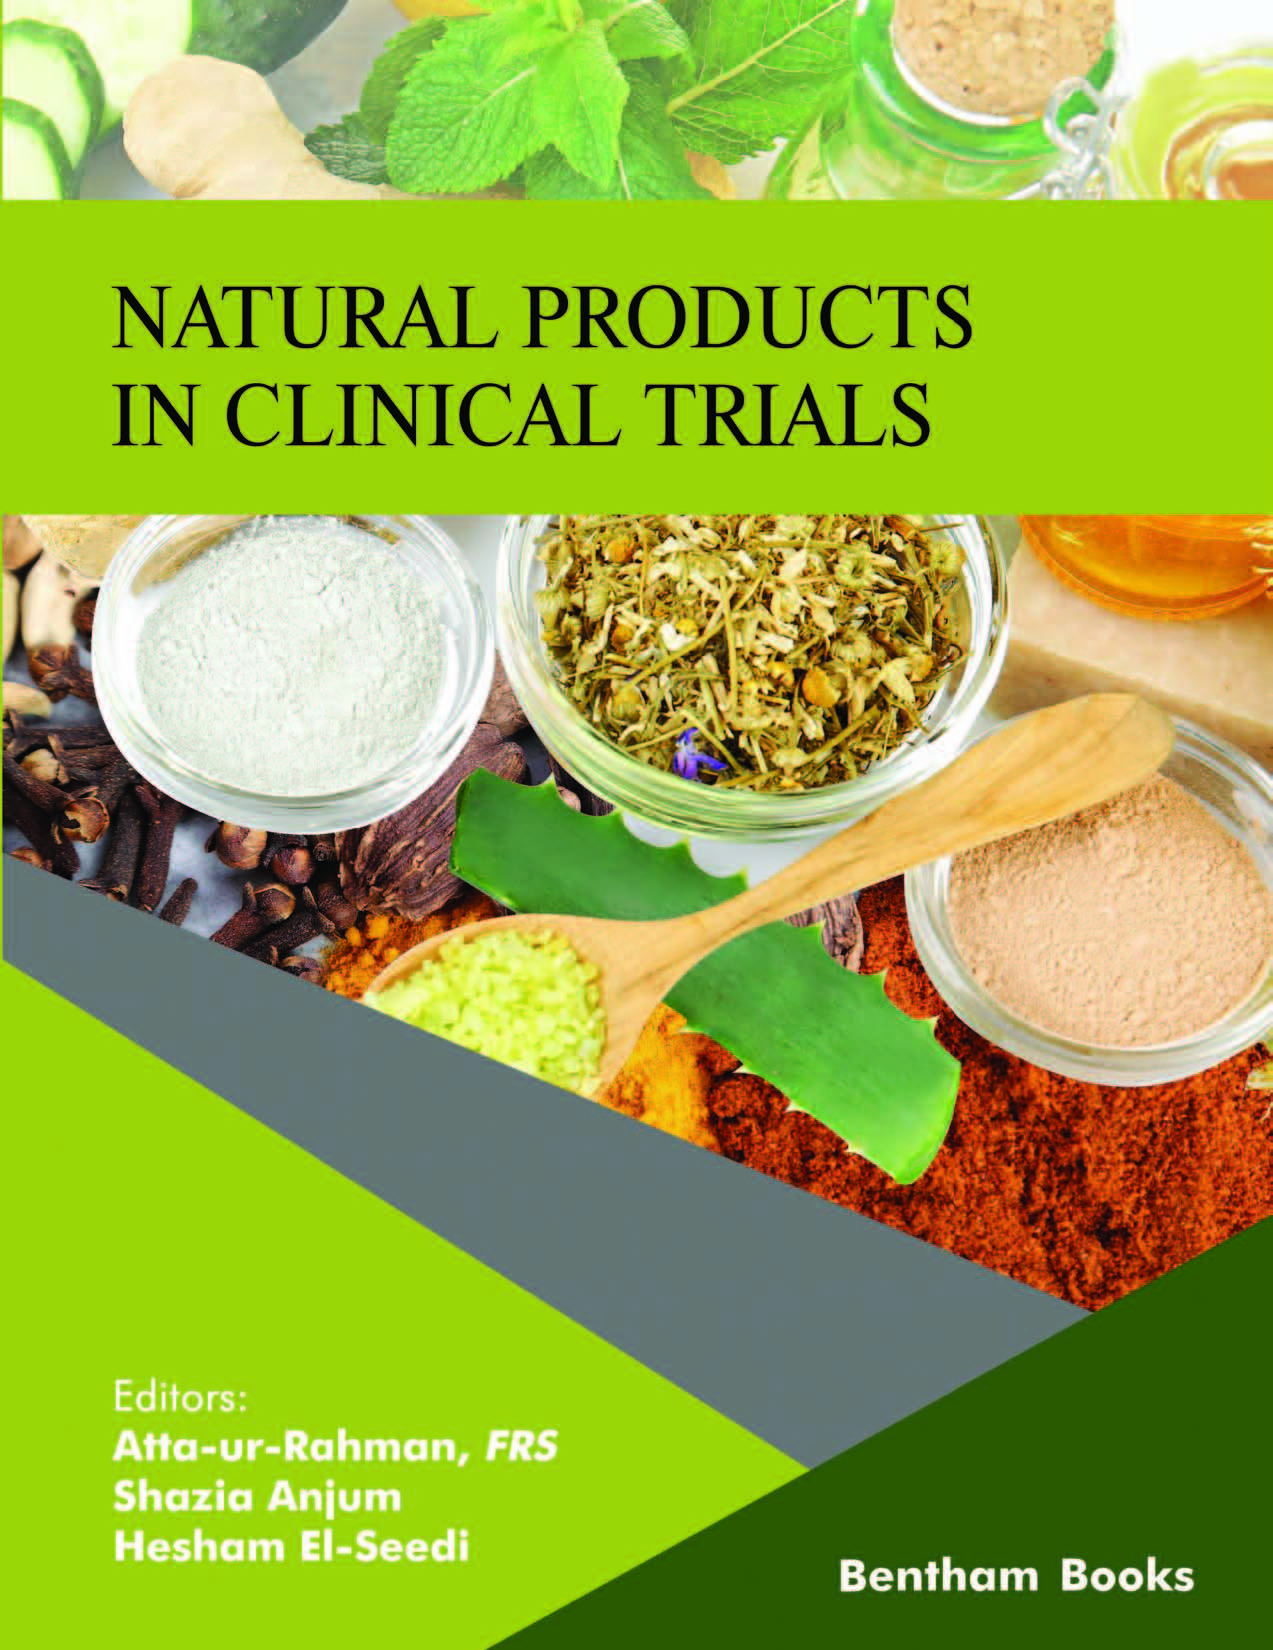 Natural Products in Clinical Trials